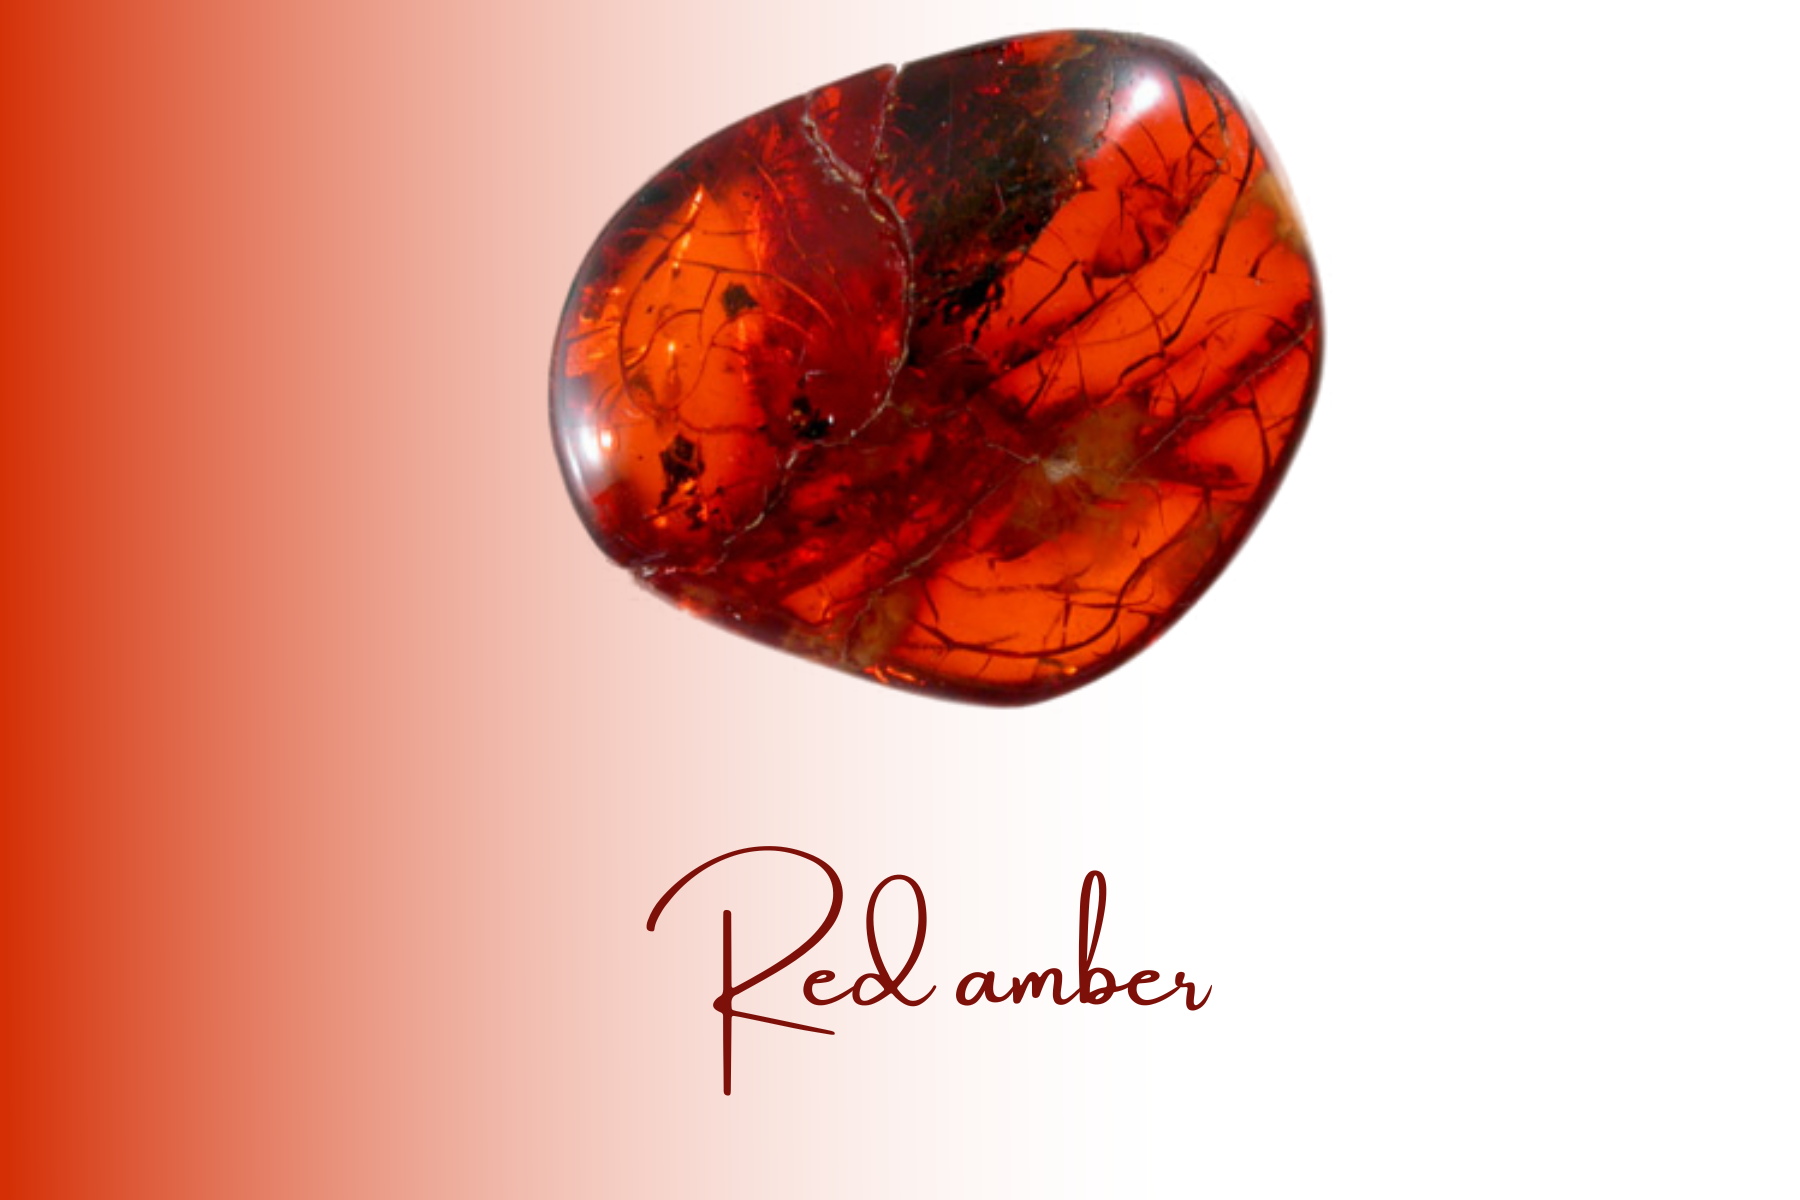 Cracked red amber with veins inside